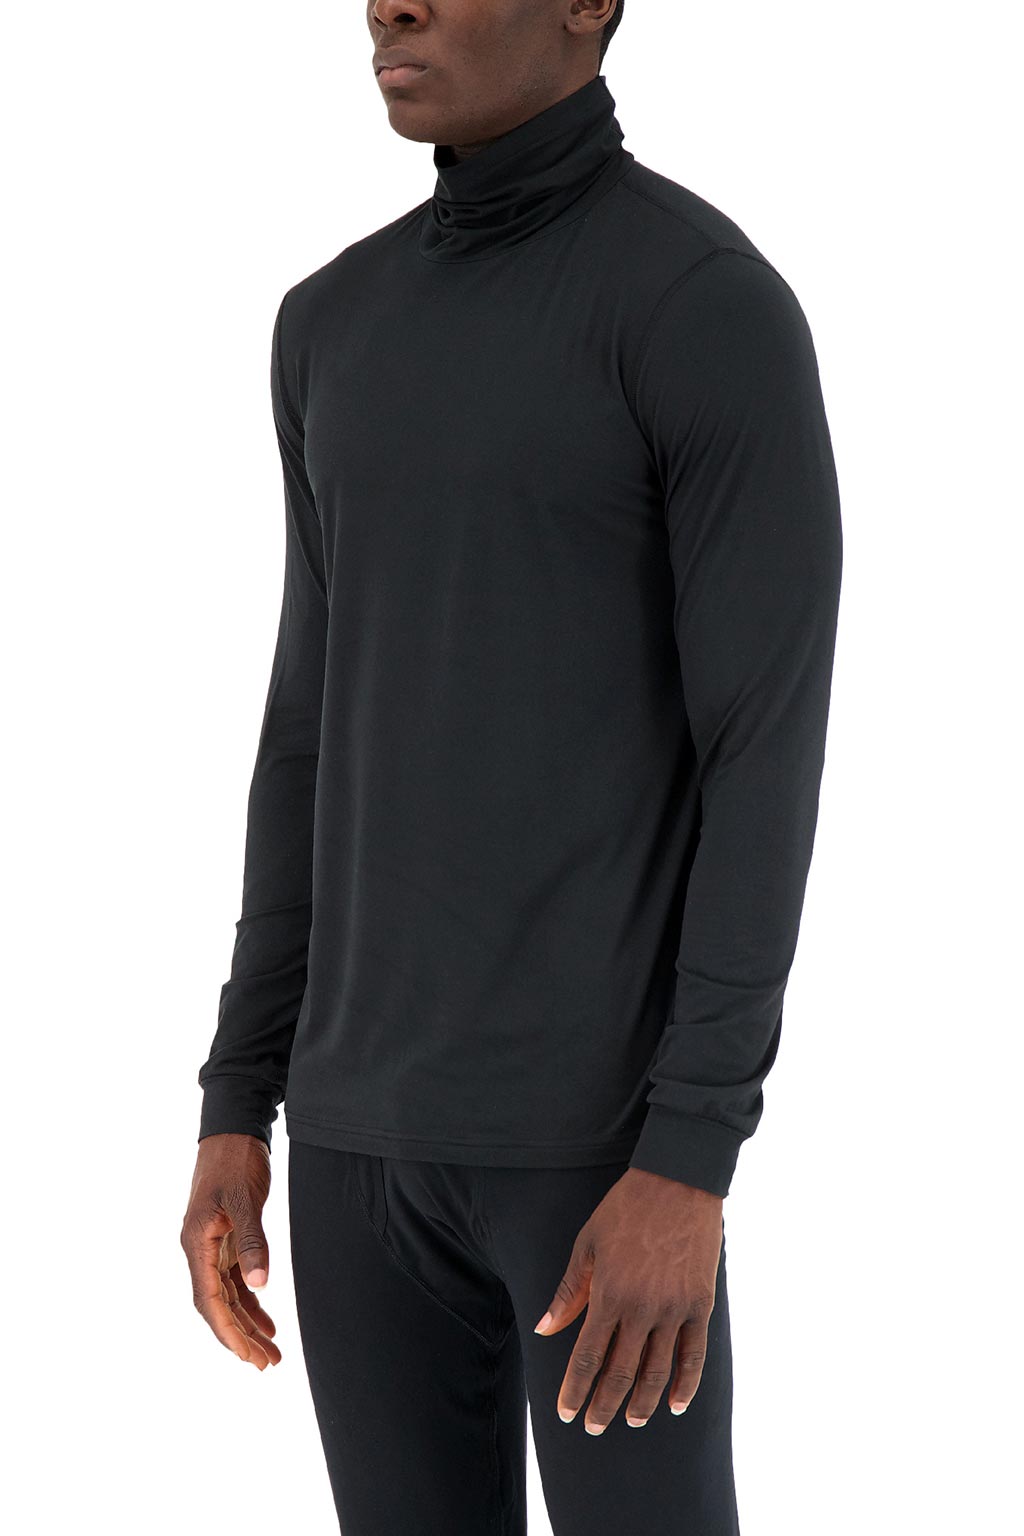 Mock Turtleneck Thermal Undershirt Mens Long Sleeve Base Layer Shirts :  : Clothing, Shoes & Accessories